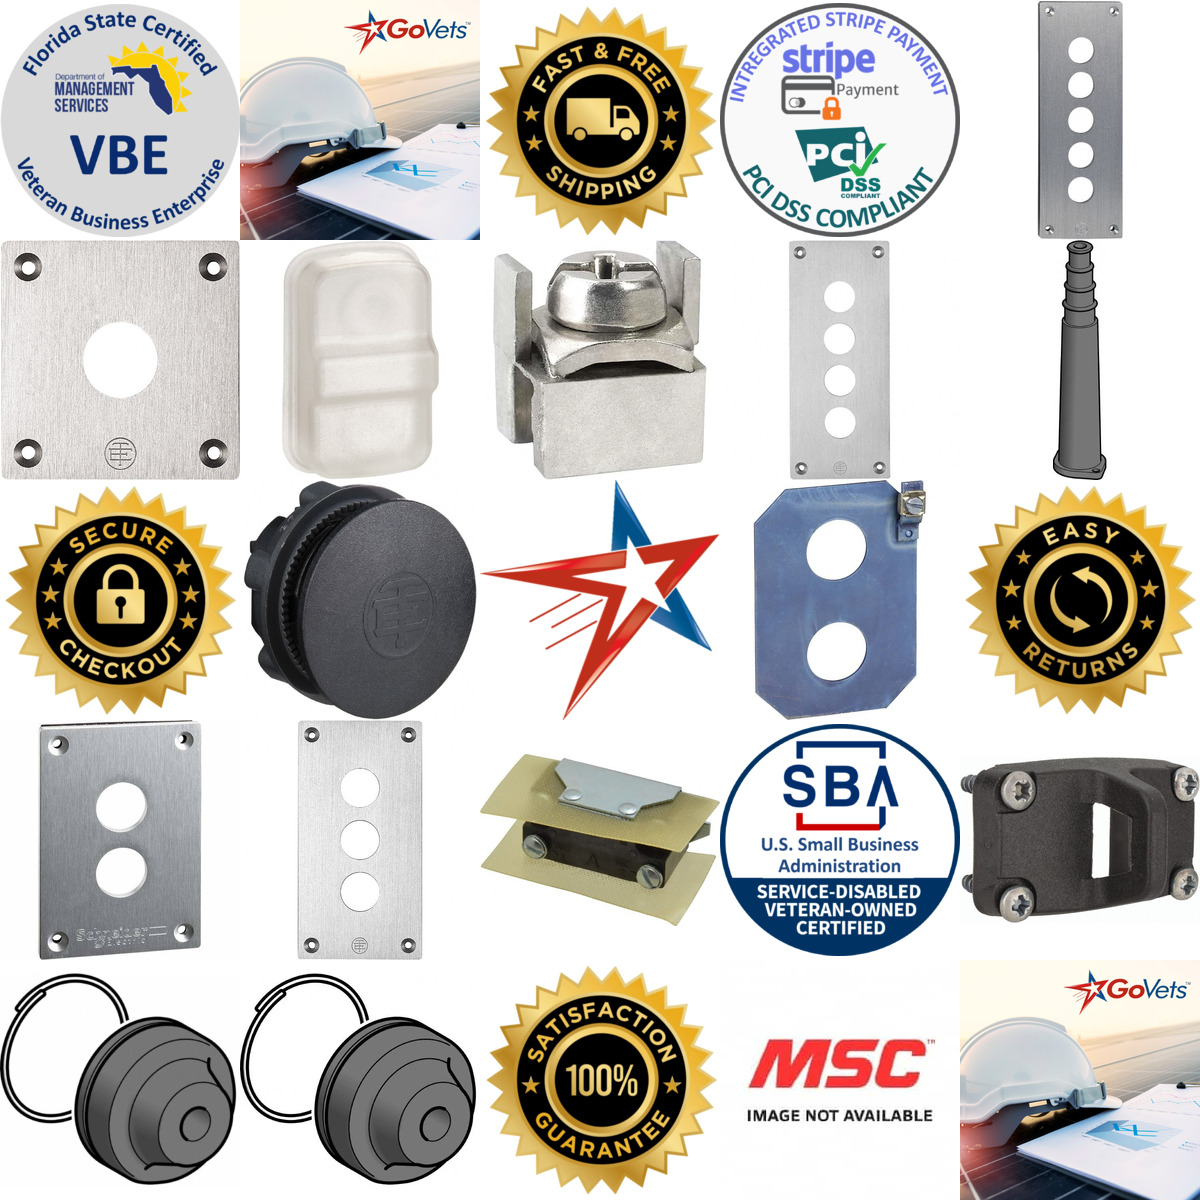 A selection of Pushbutton Control Station Accessories products on GoVets